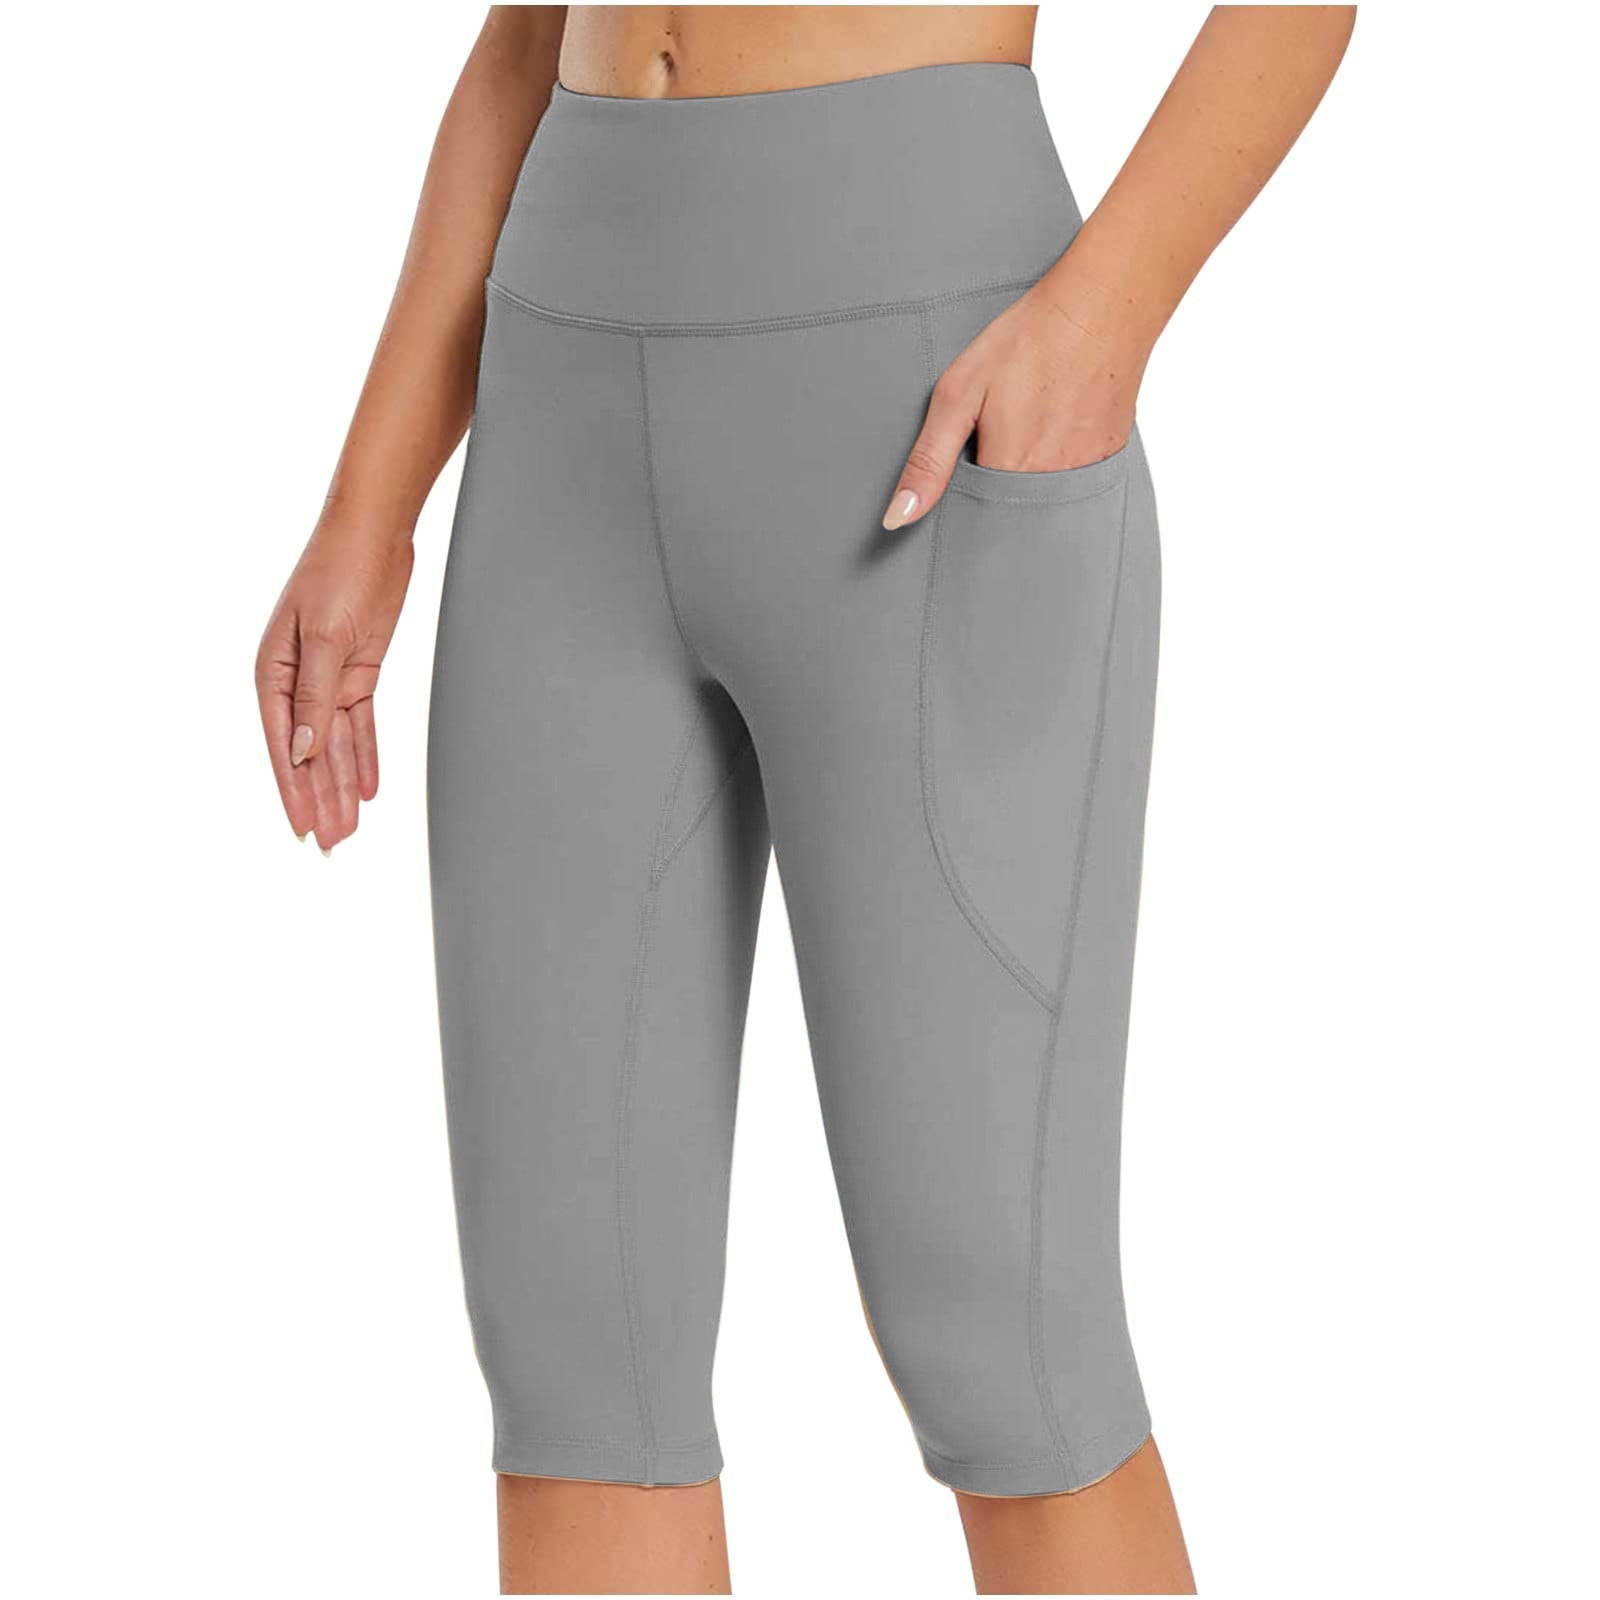 YWDJ Tights for Women Capris With Pockets High Waist Casual Yogalicious  Summer Utility Dressy Everyday Soft Solid Color Pocket Knee Length Leggings  Capris For Casual Summer With Pockets Gray L 